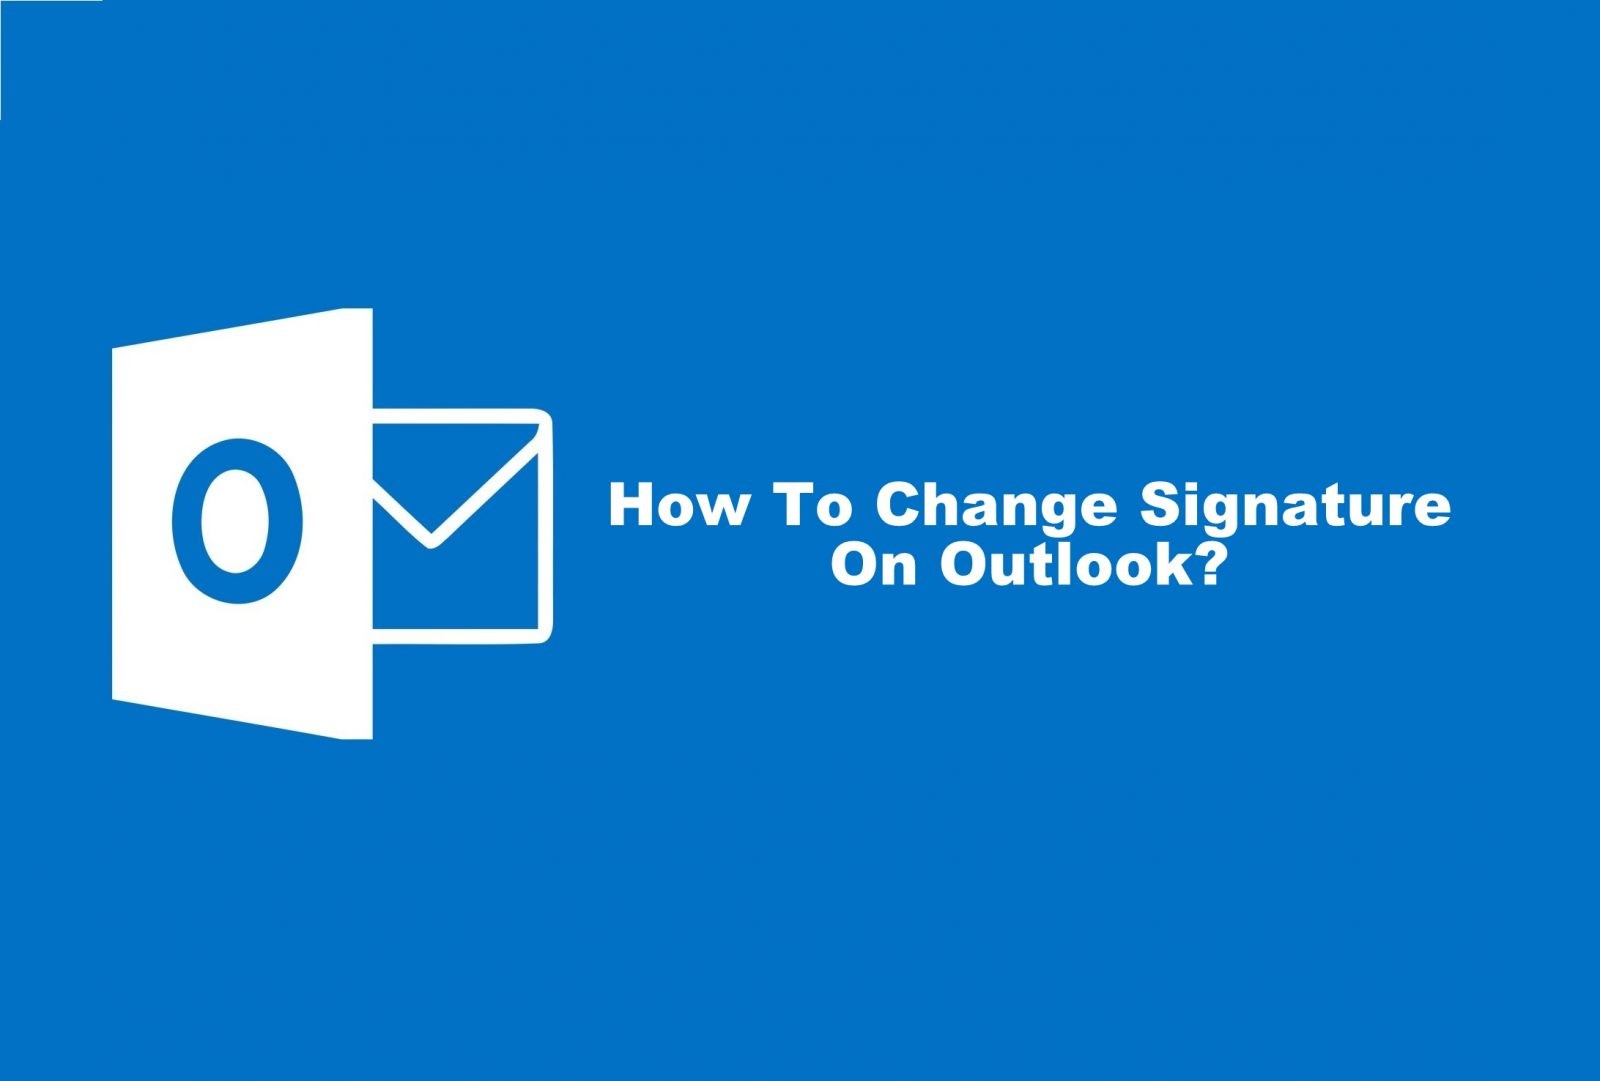 how to add signature in outlook mobile app